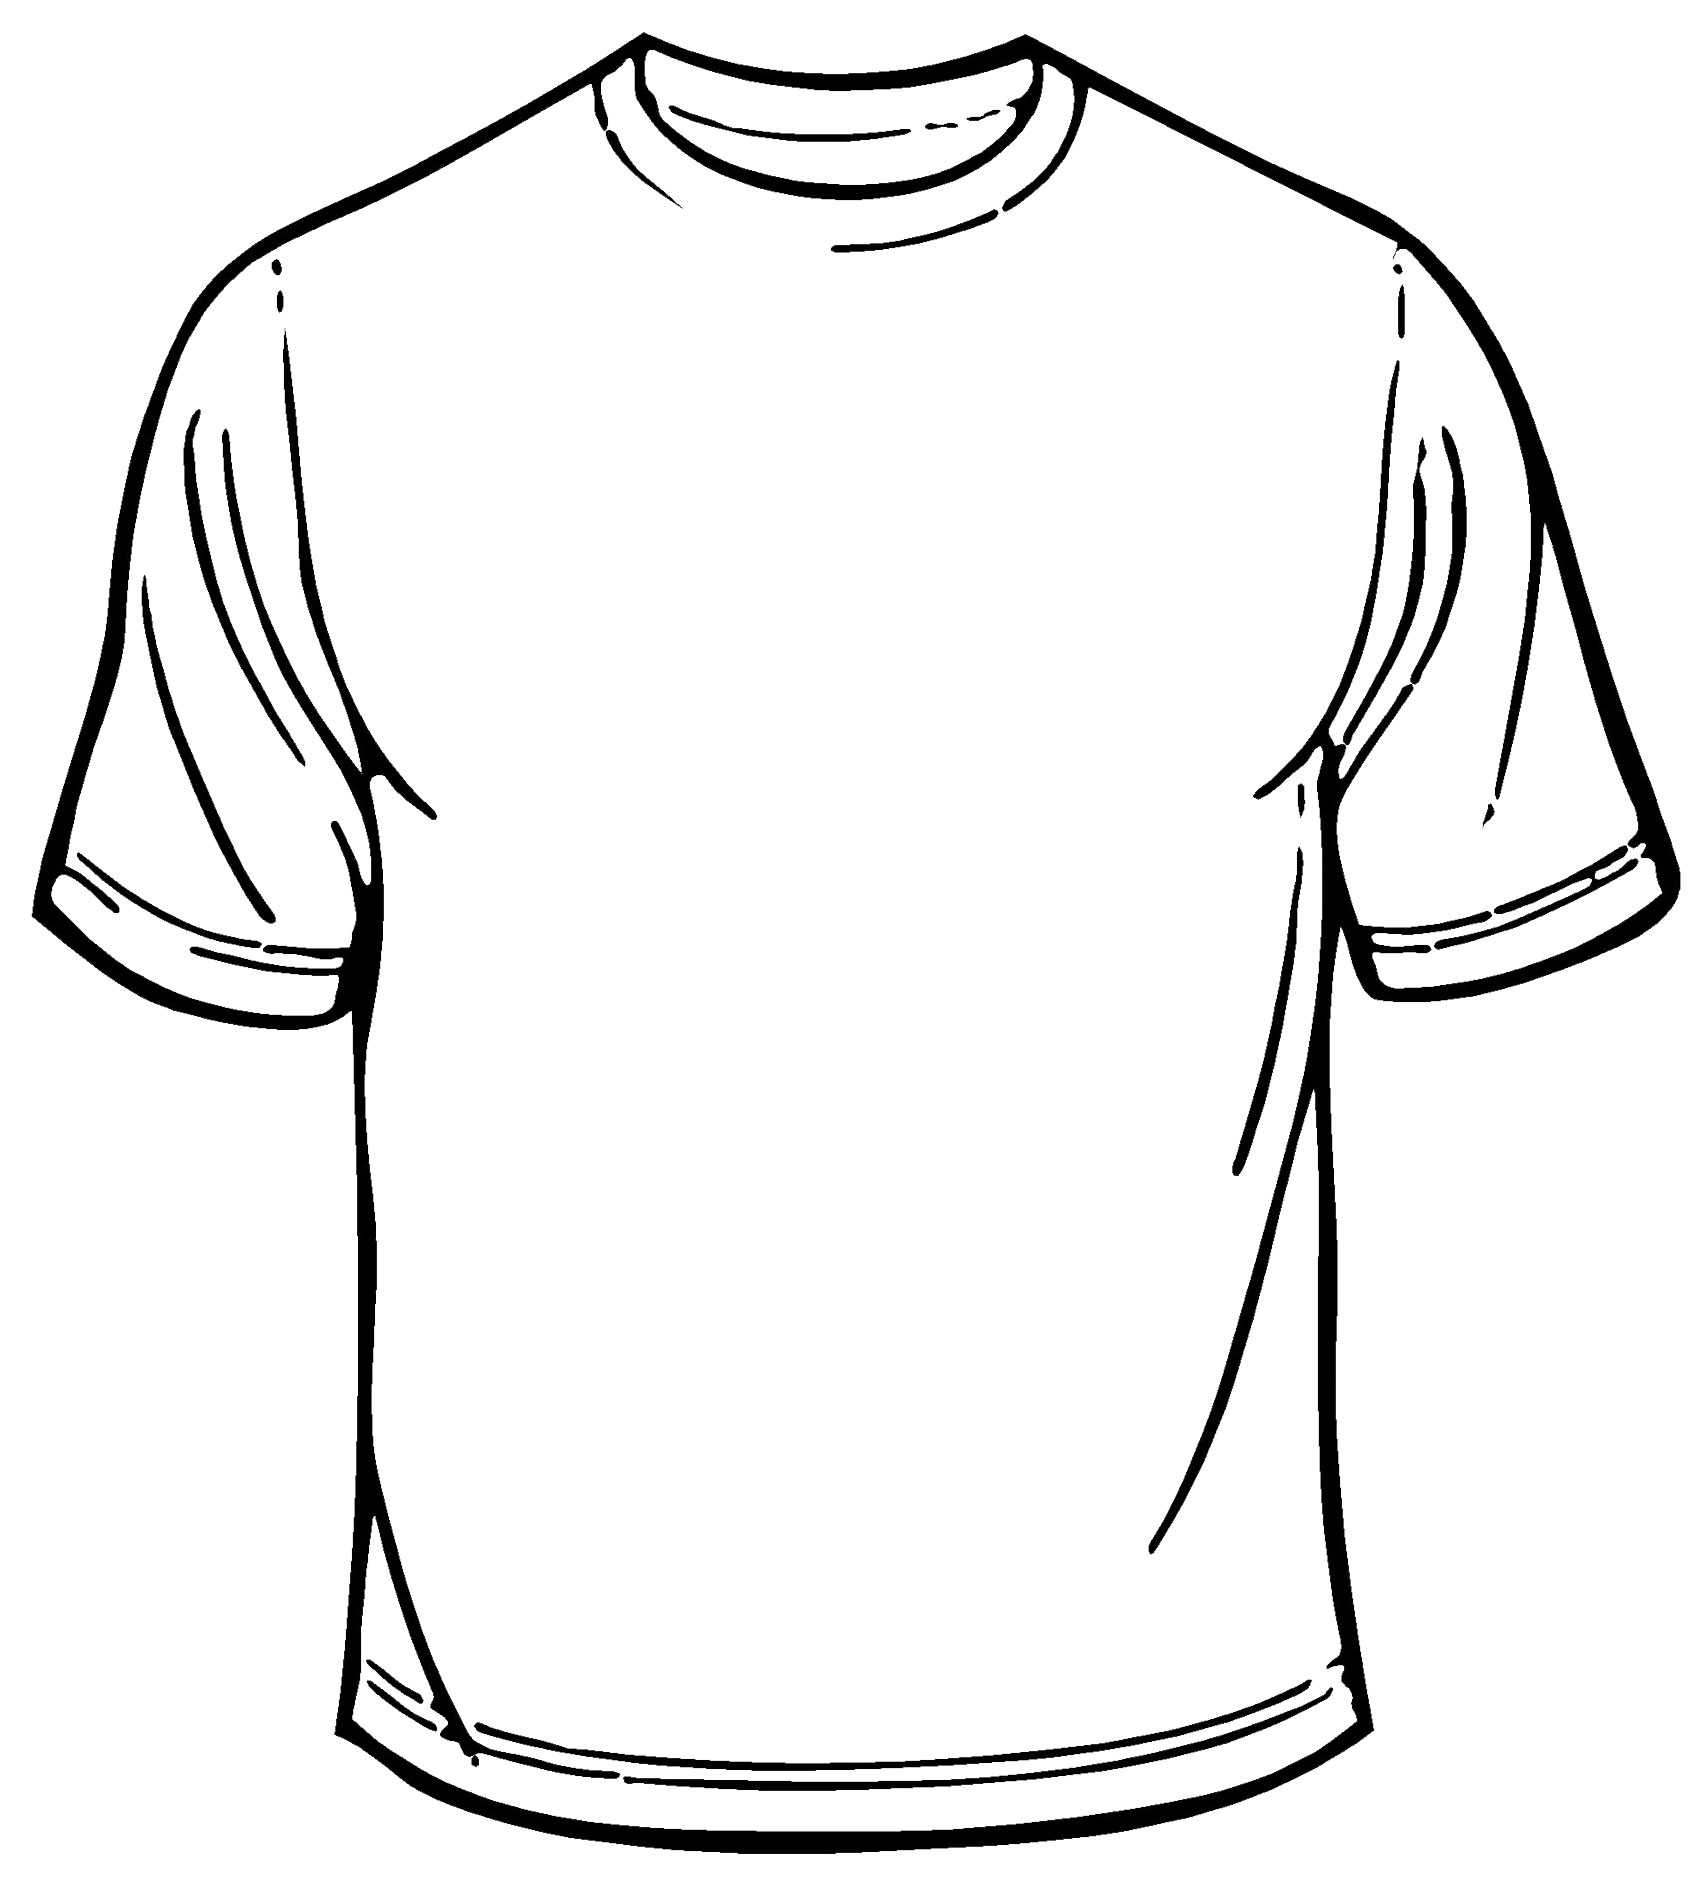 Free Blank T Shirt Outline, Download Free Clip Art, Free In Blank T Shirt Outline Template